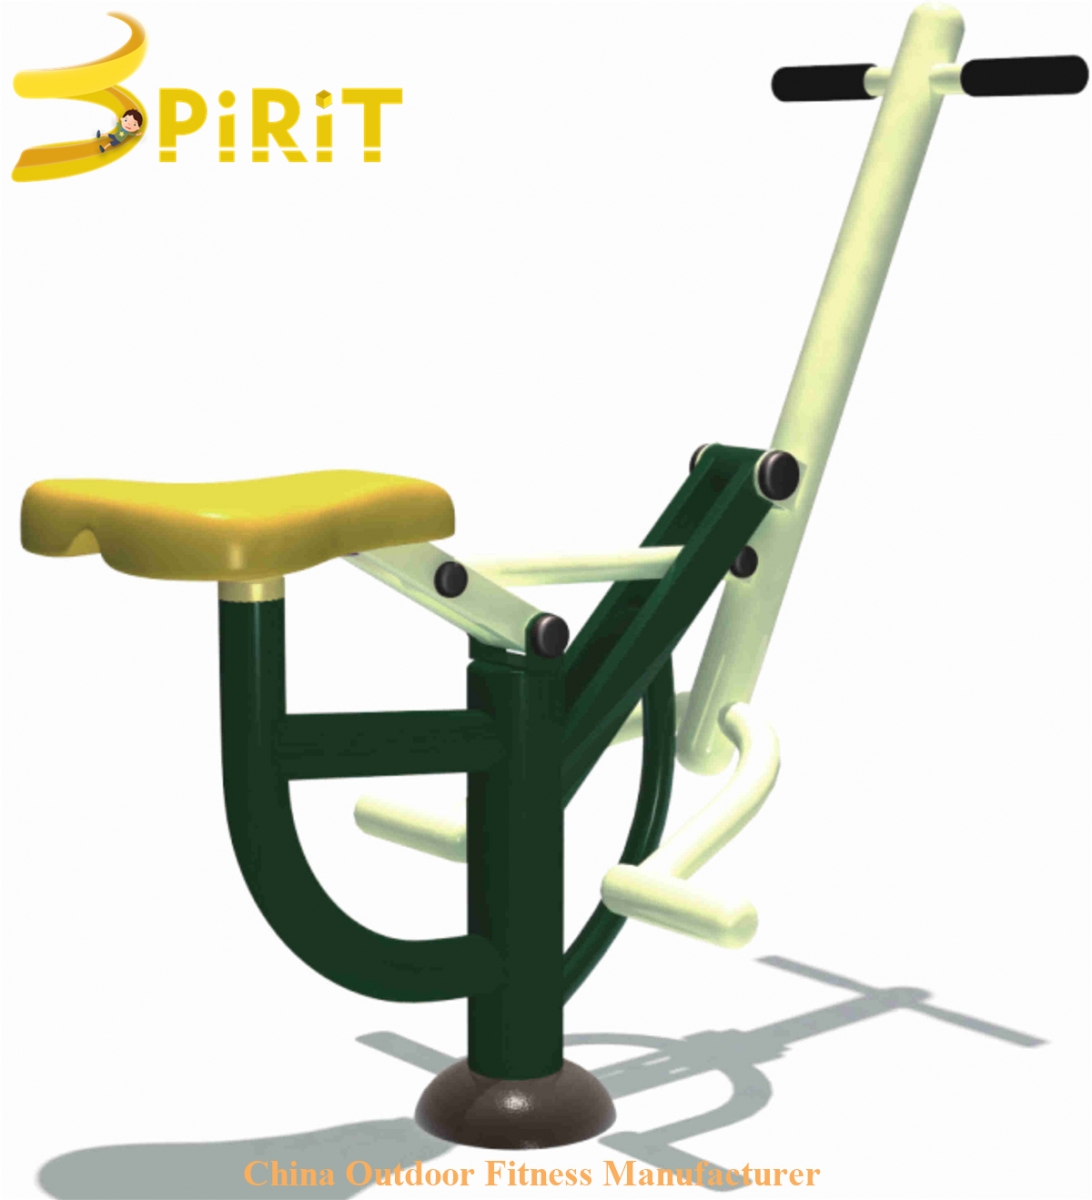 Cheap Gym equipment for sale in community playground.-SPIRIT PLAY,Outdoor Playground, Indoor Playground,Trampoline Park,Outdoor Fitness,Inflatable,Soft Playground,Ninja Warrior,Trampoline Park,Playground Structure,Play Structure,Outdoor Fitness,Water Park,Play System,Freestanding,Interactive,independente ,Inklusibo, Park, Pagsaka sa Bungbong, Dula sa Bata